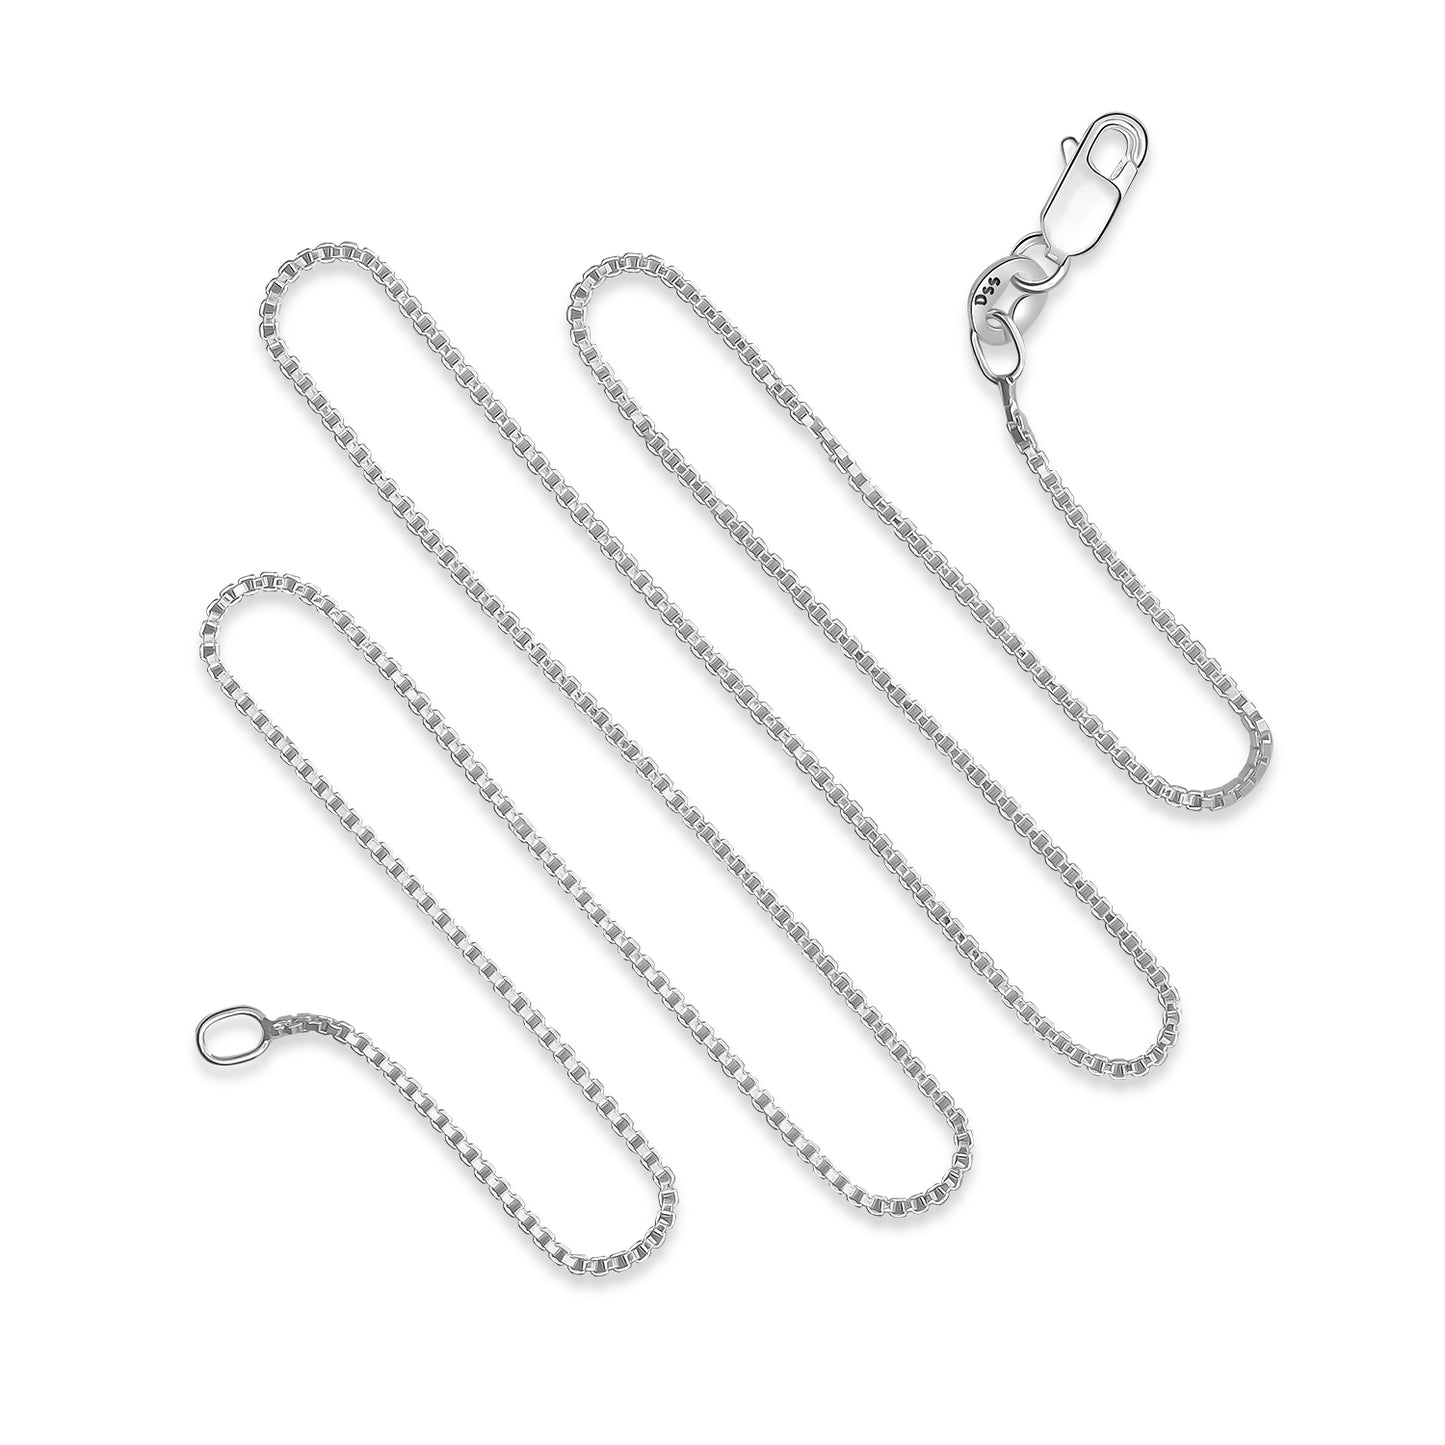 1MM Sterling Silver Box Chain with Lobster Claw Clasp 16"-30" perfect for pendants. this is a strong chain and one of the very most popular chains.